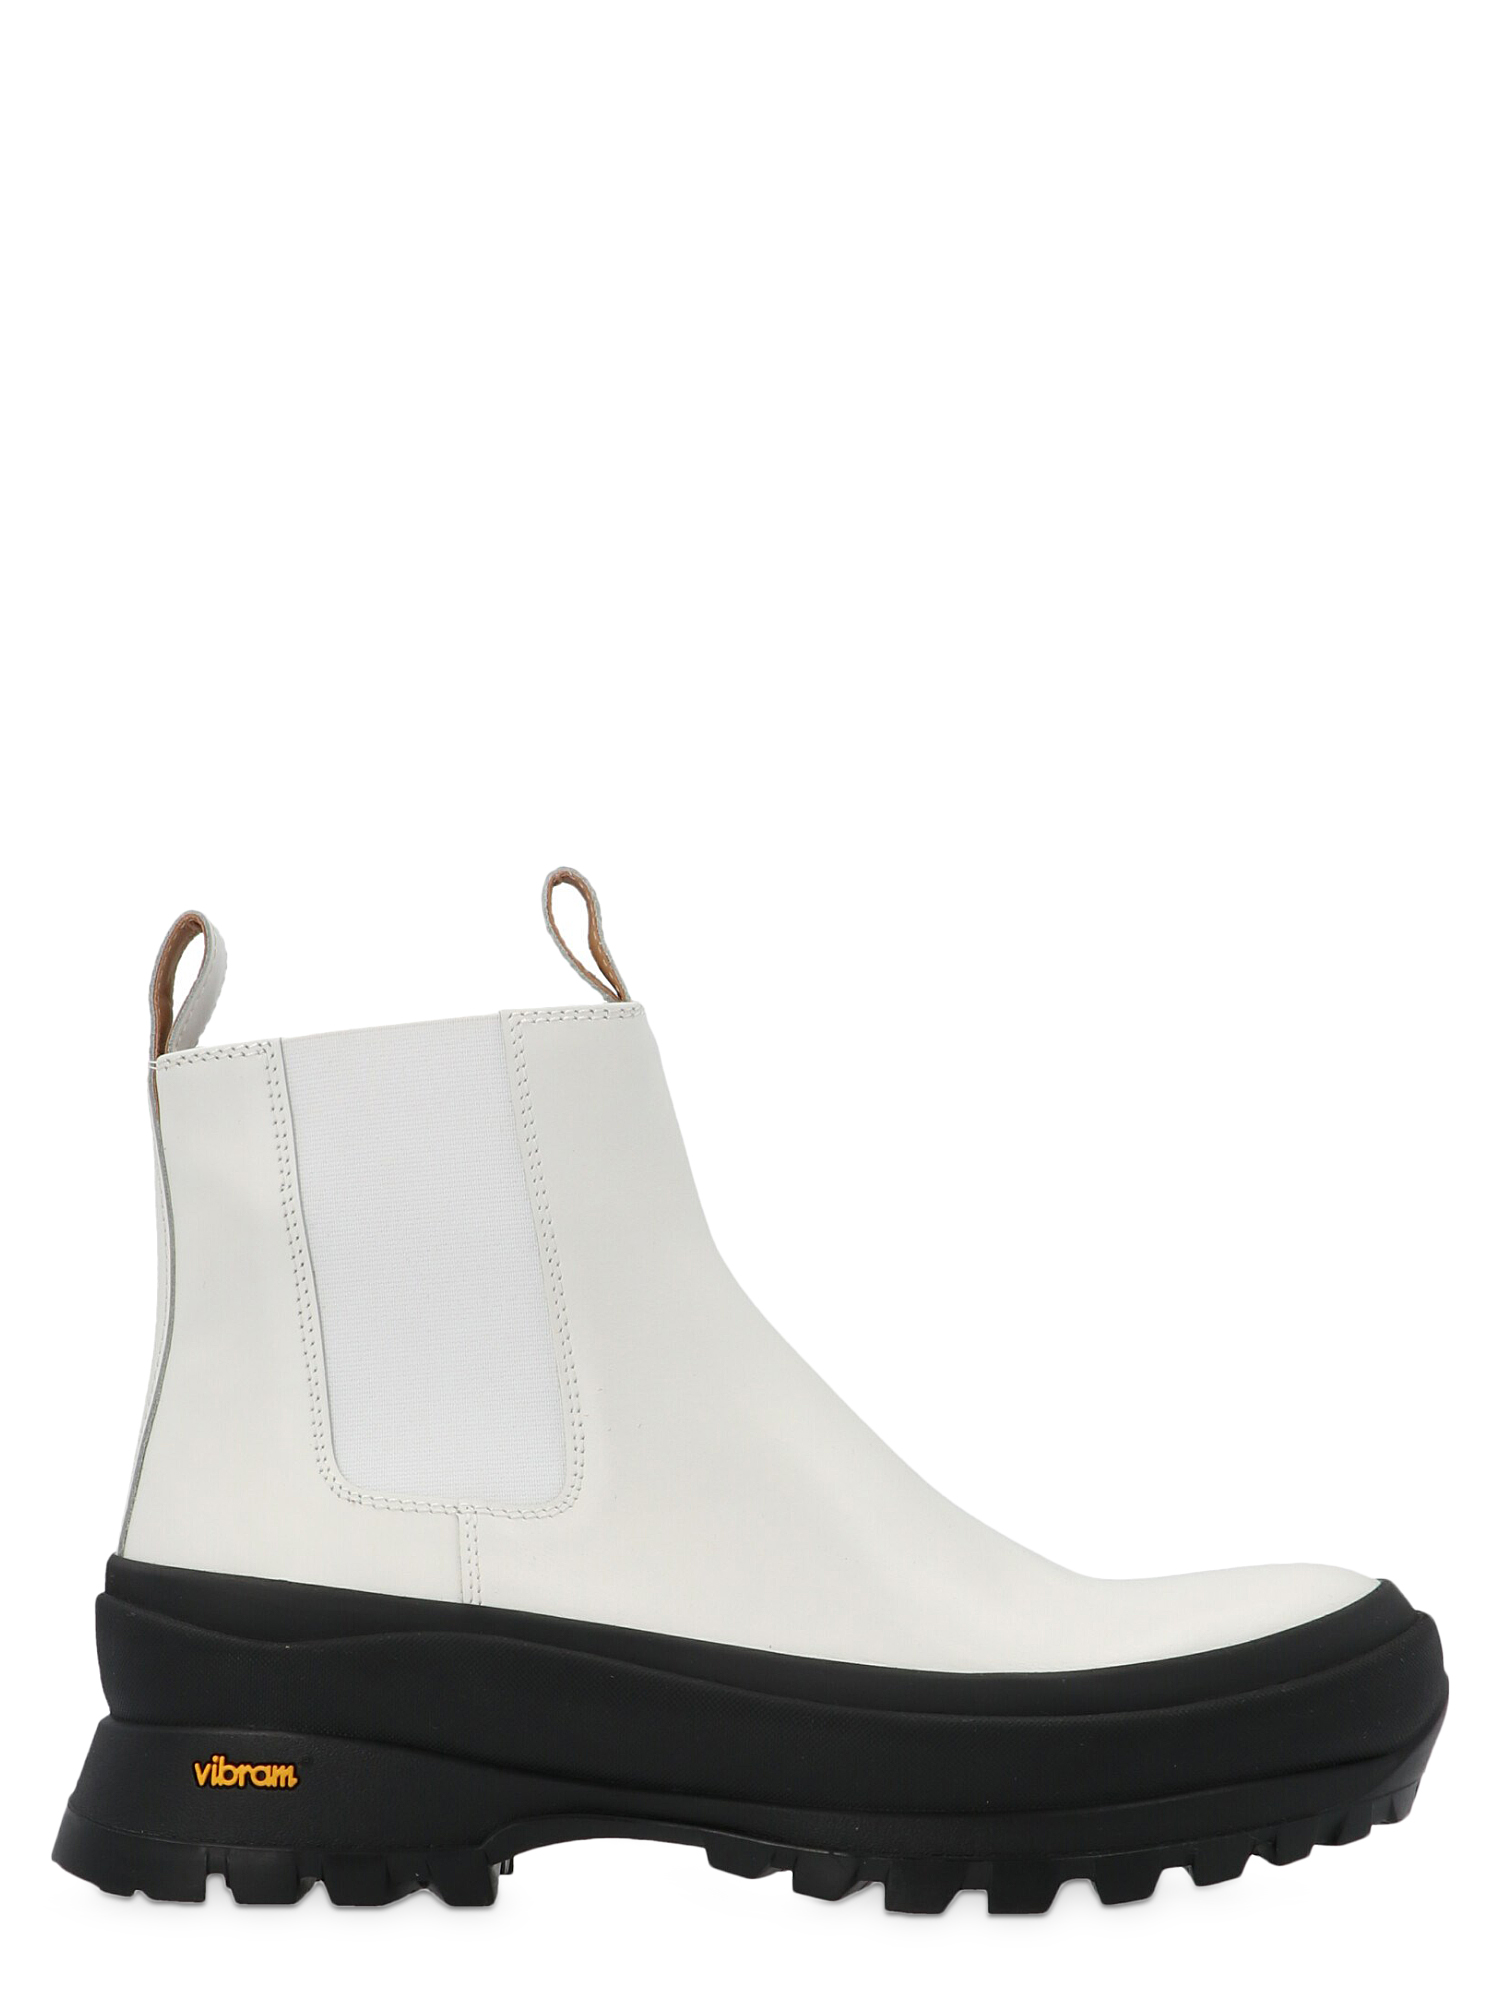 'Virbram' sole ankle boots